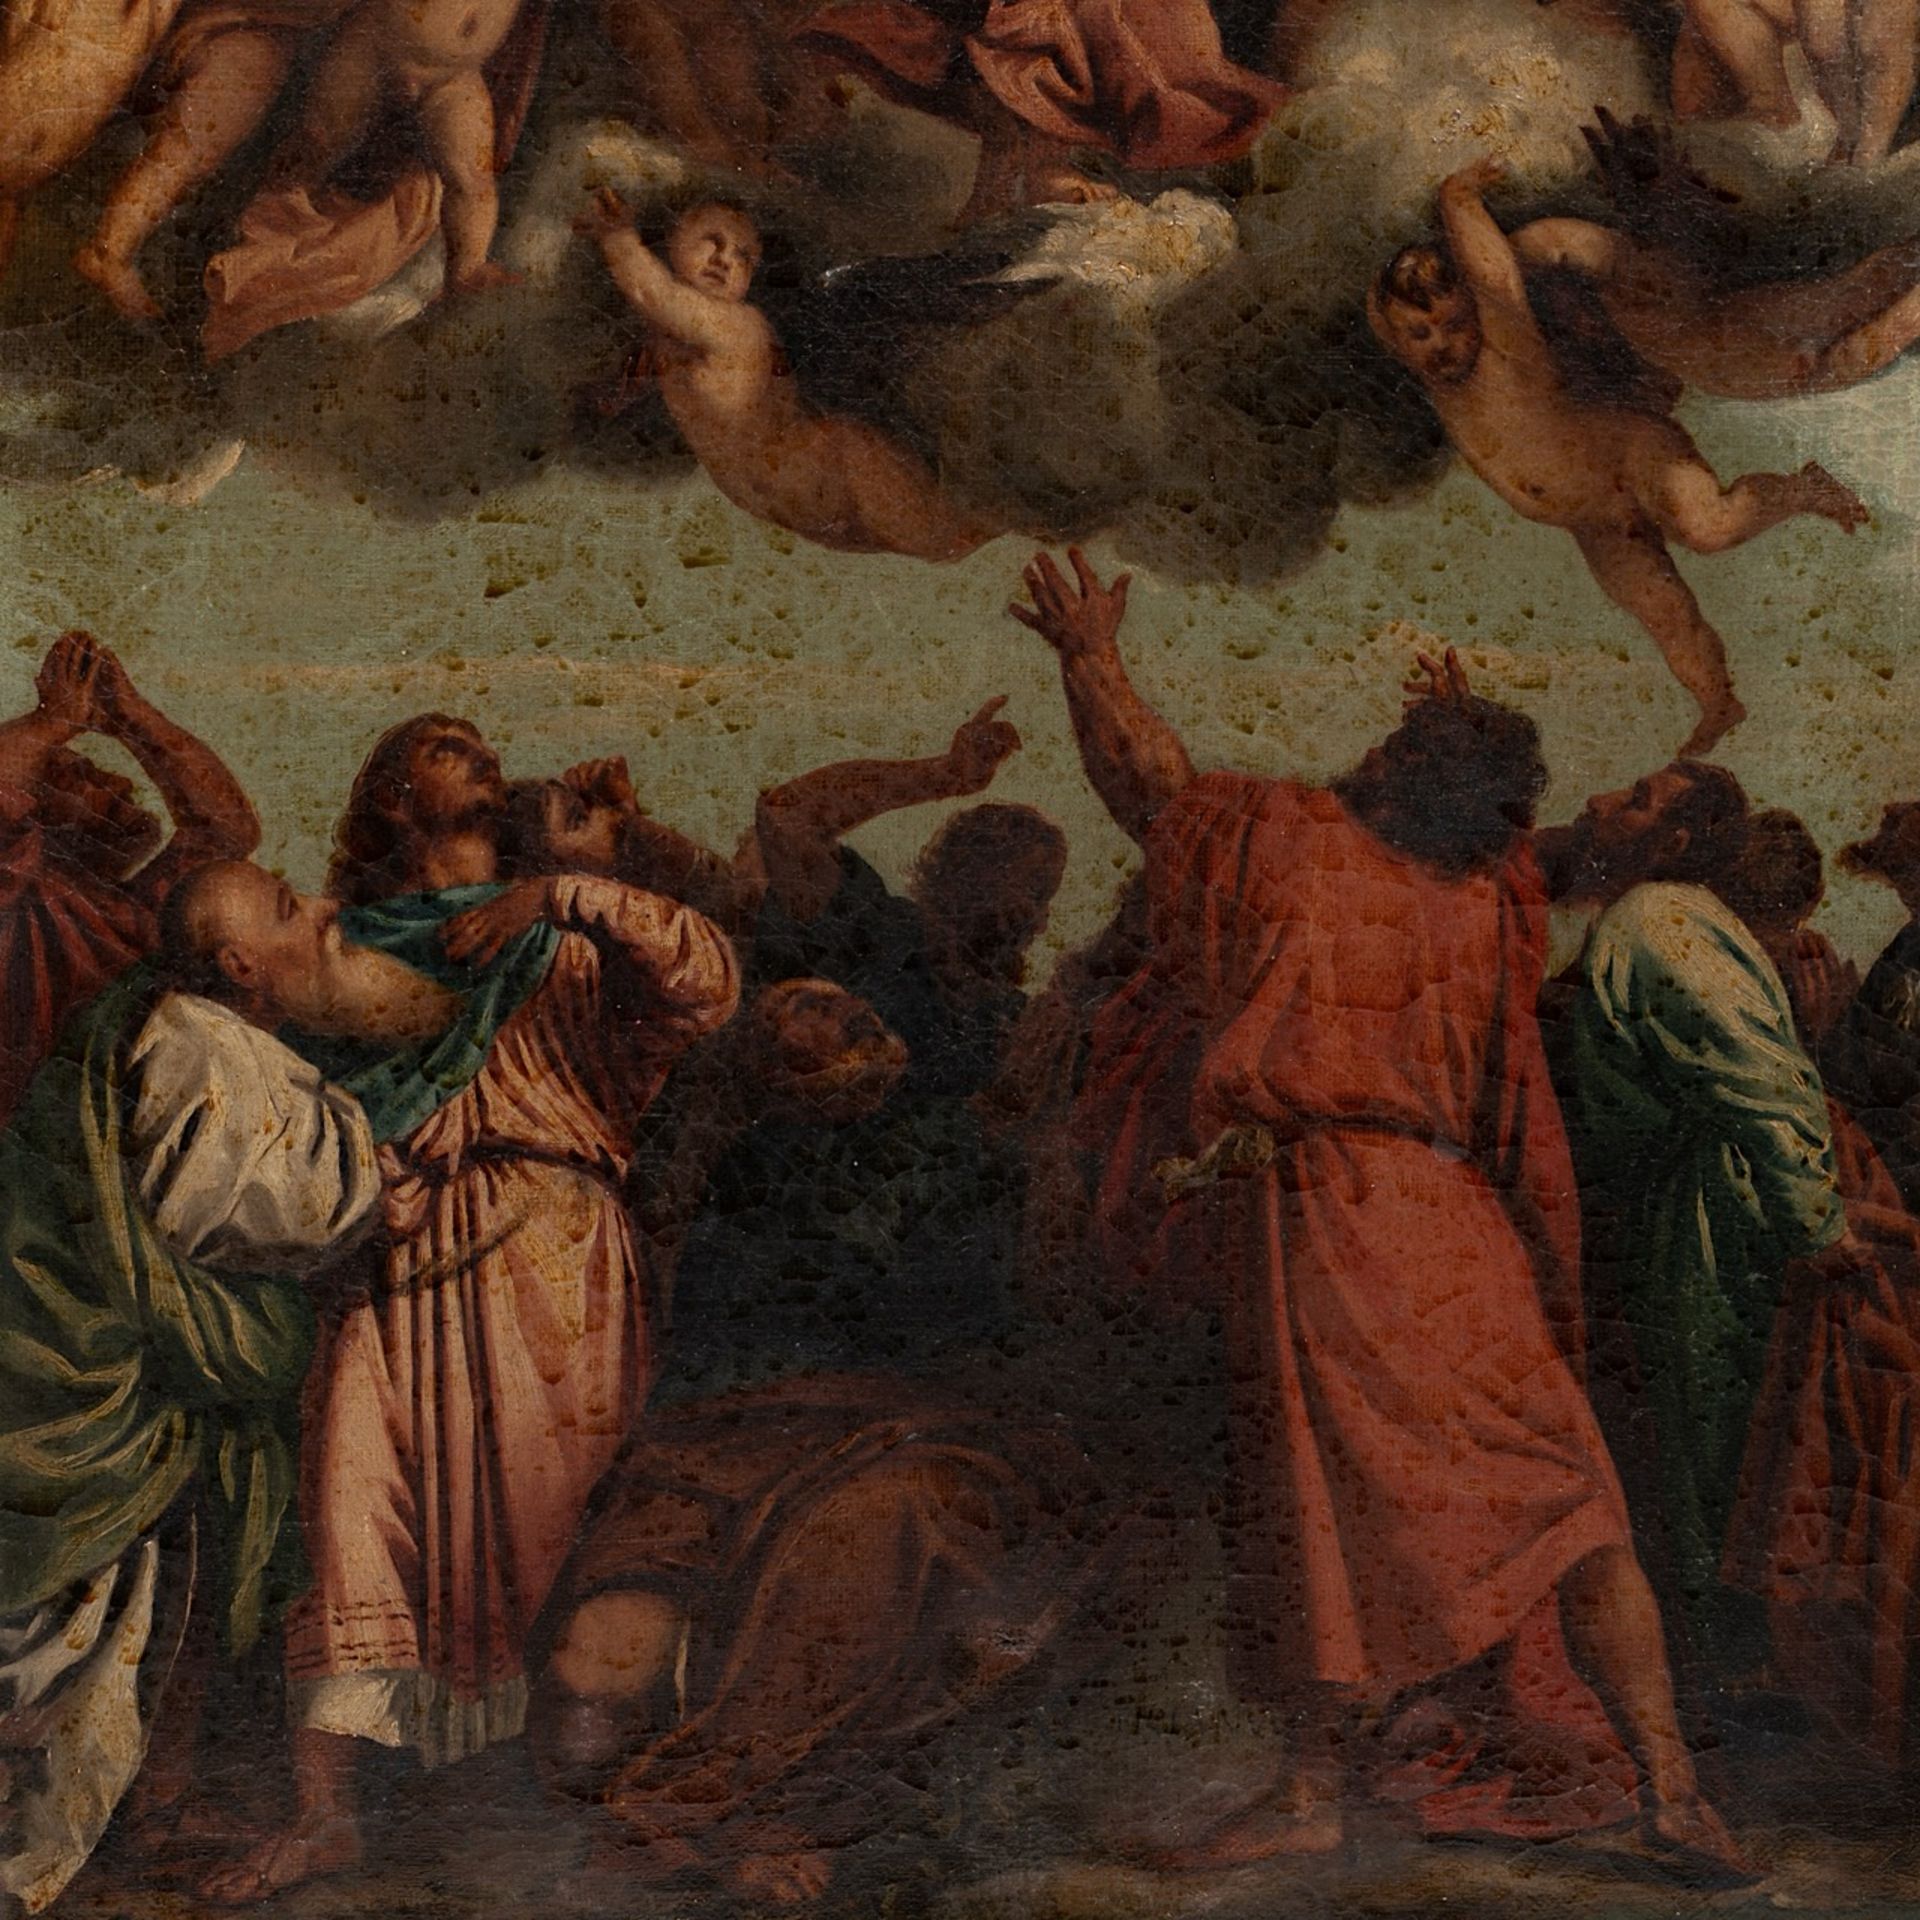 After The Assumption of the Virgin by Titian (1488-90-1576), oil on canvas 68 x 39 cm. (26.7 x 15.3 - Image 6 of 7